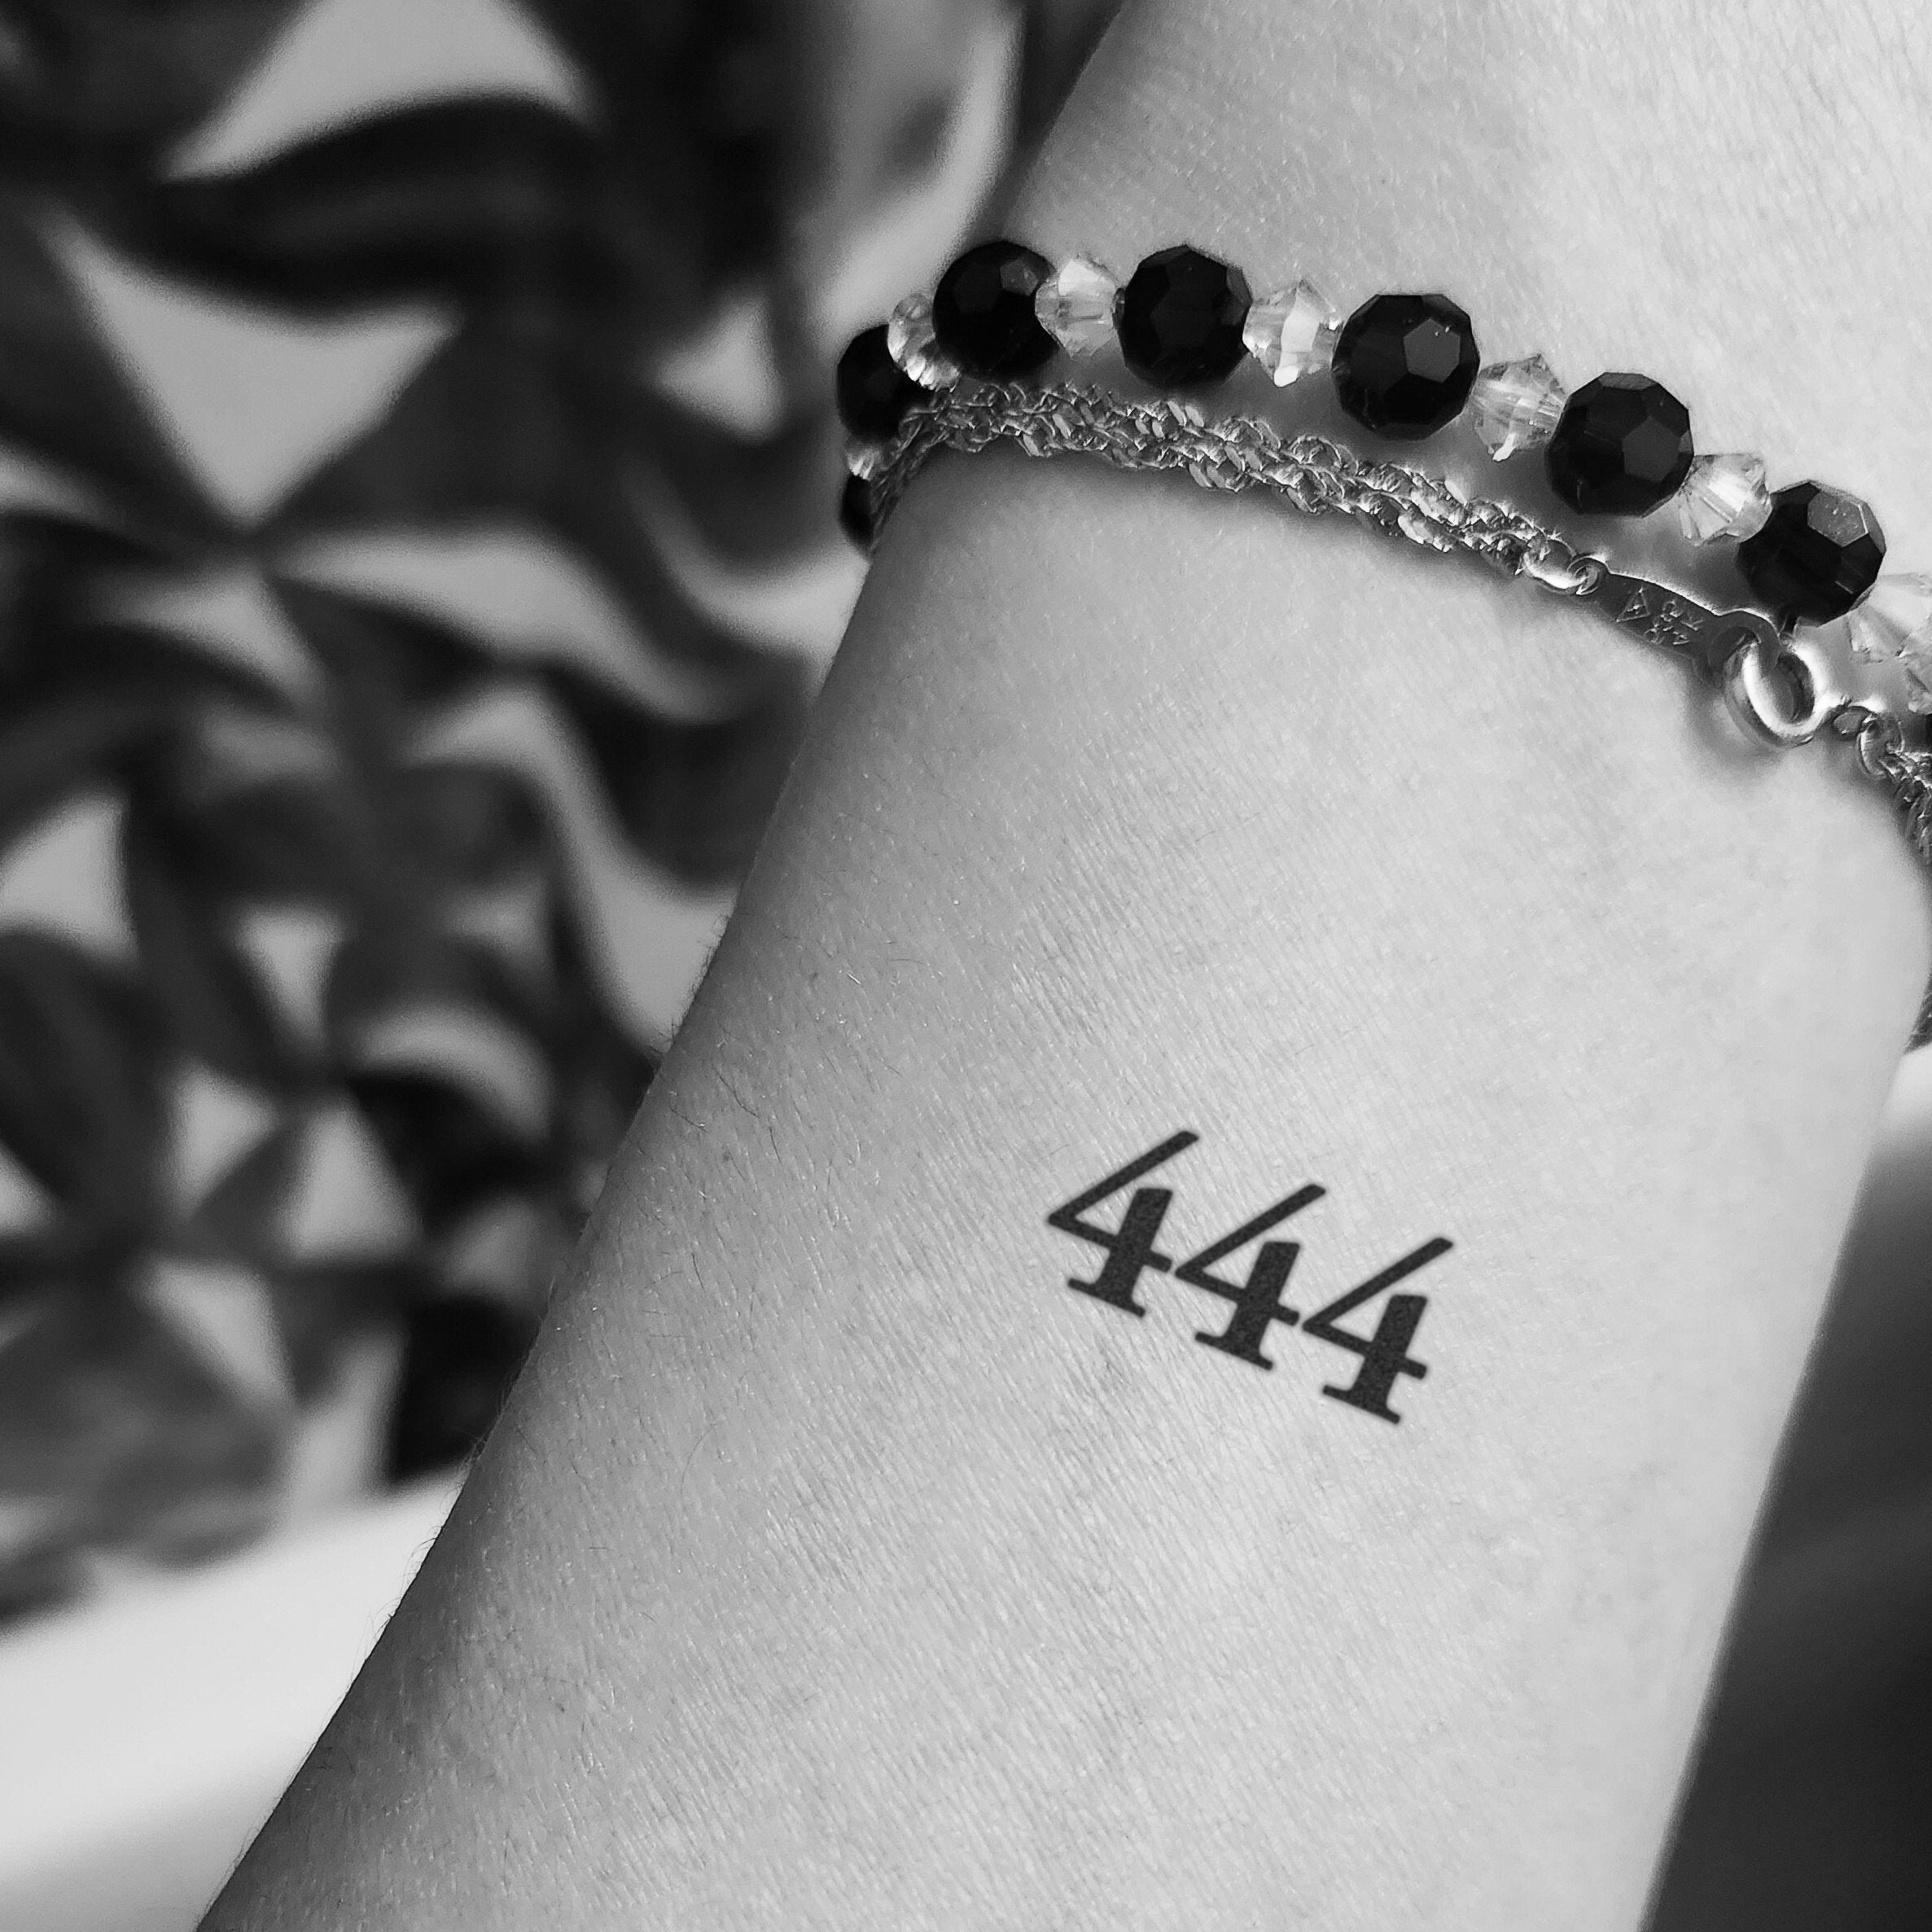 What does the 444 tattoo mean